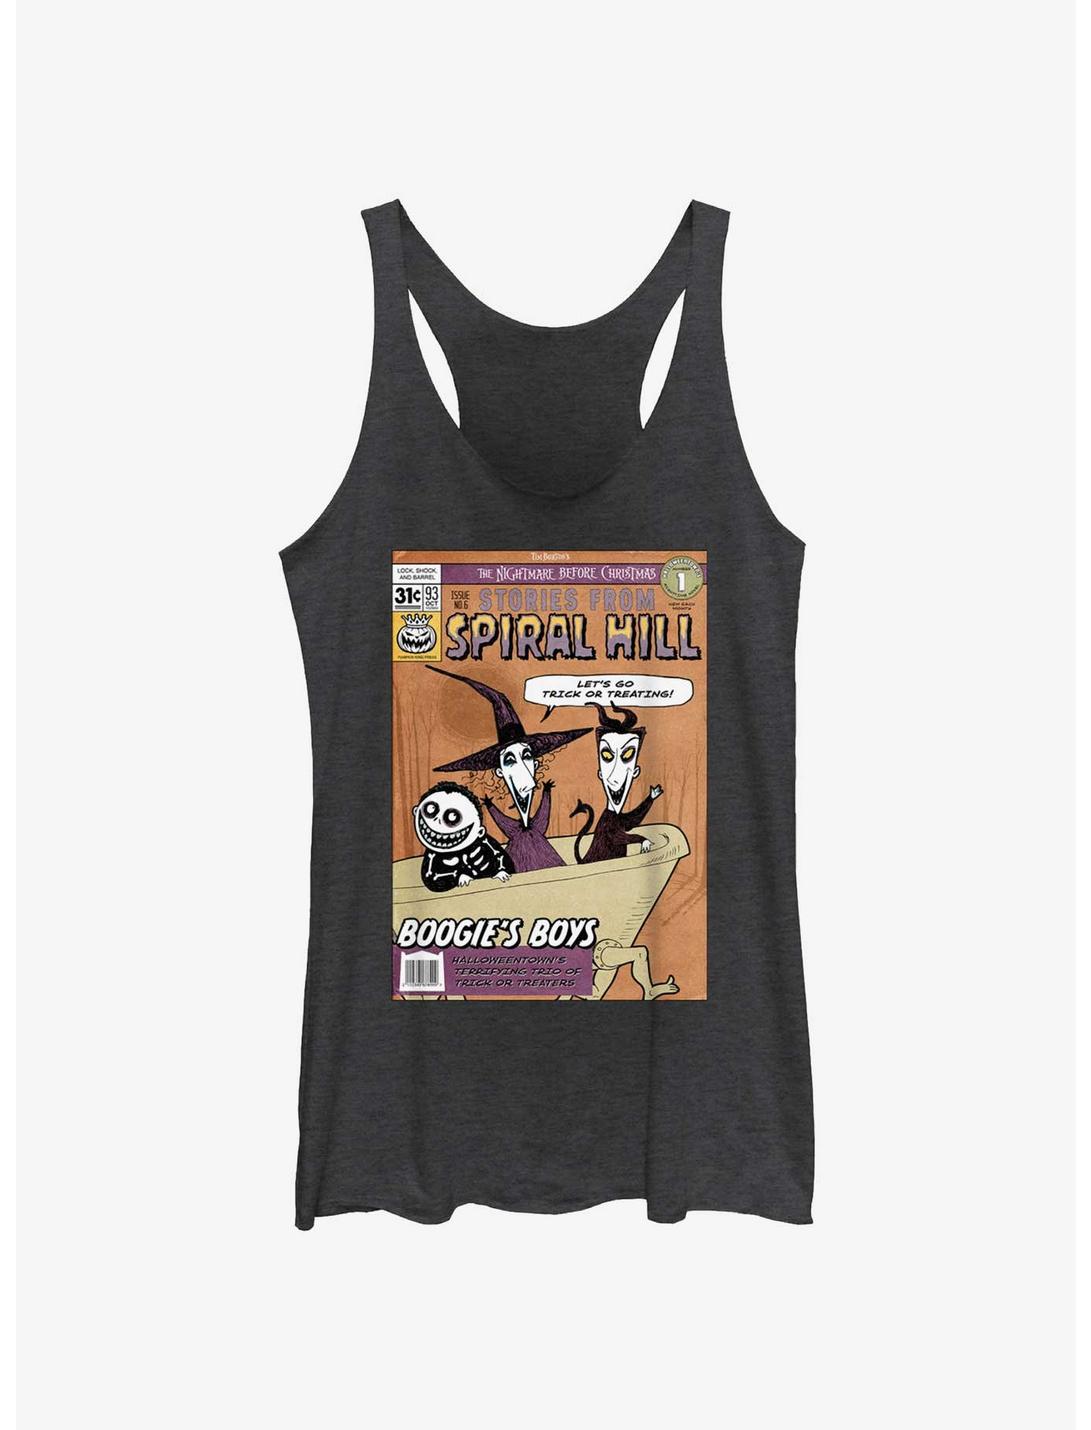 Disney The Nightmare Before Christmas Stories From Spiral Hill Boogie's Boys Girls Tank Top, BLK HTR, hi-res